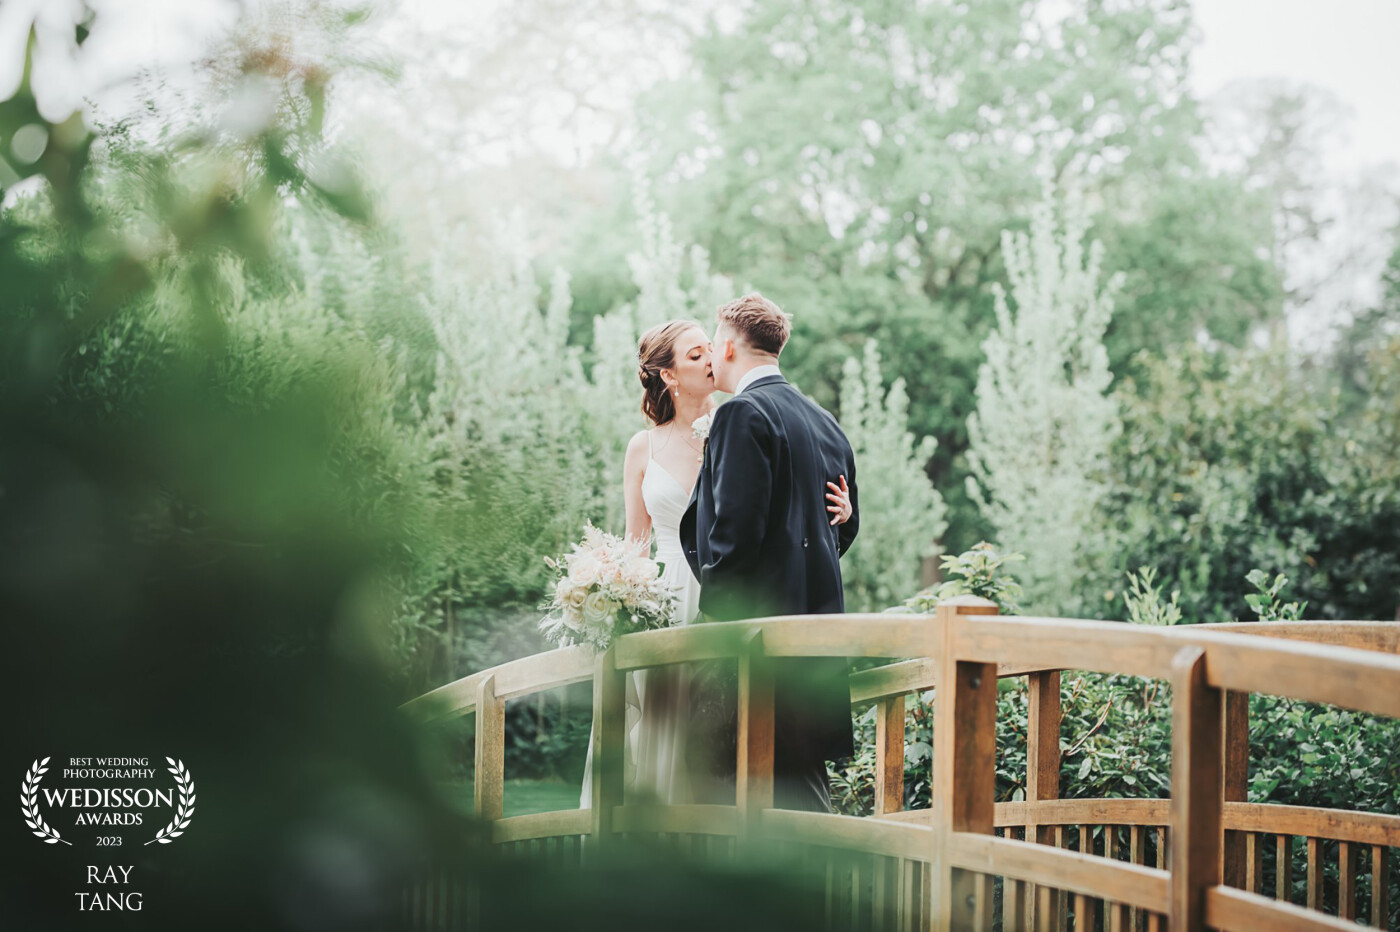 Capturing the magic of a wedding day at the breathtaking Worstead Estate in North Norfolk UK. The bridge over the river provided the perfect backdrop for this enchanting, natural image.